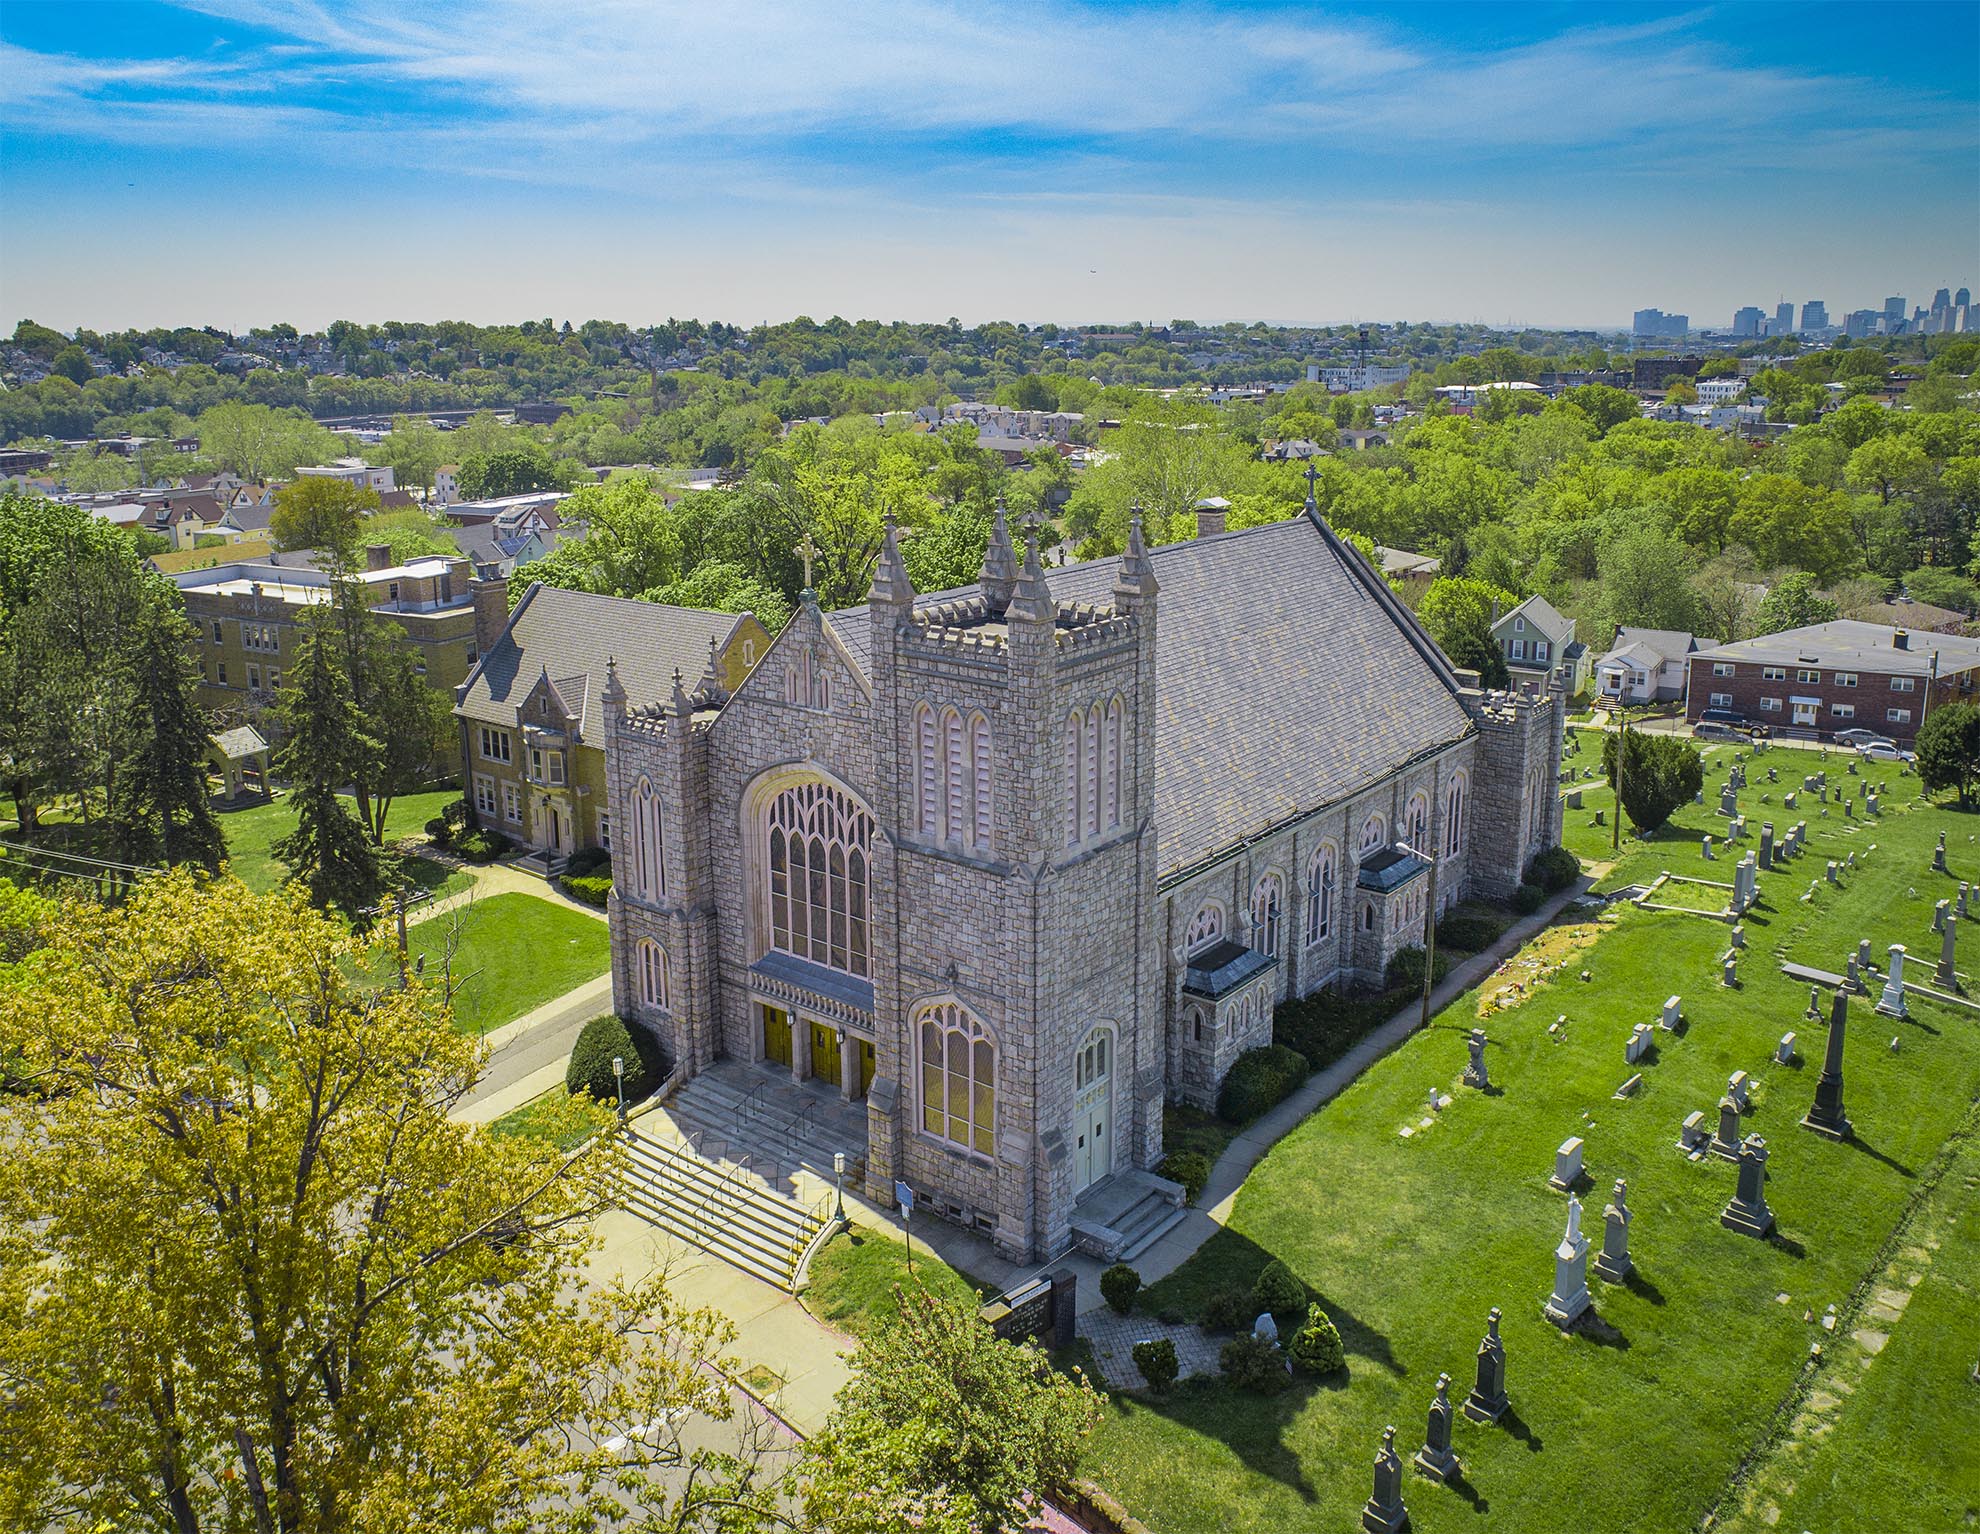 Drone photograph of St Peters Church Belleville New Jersey